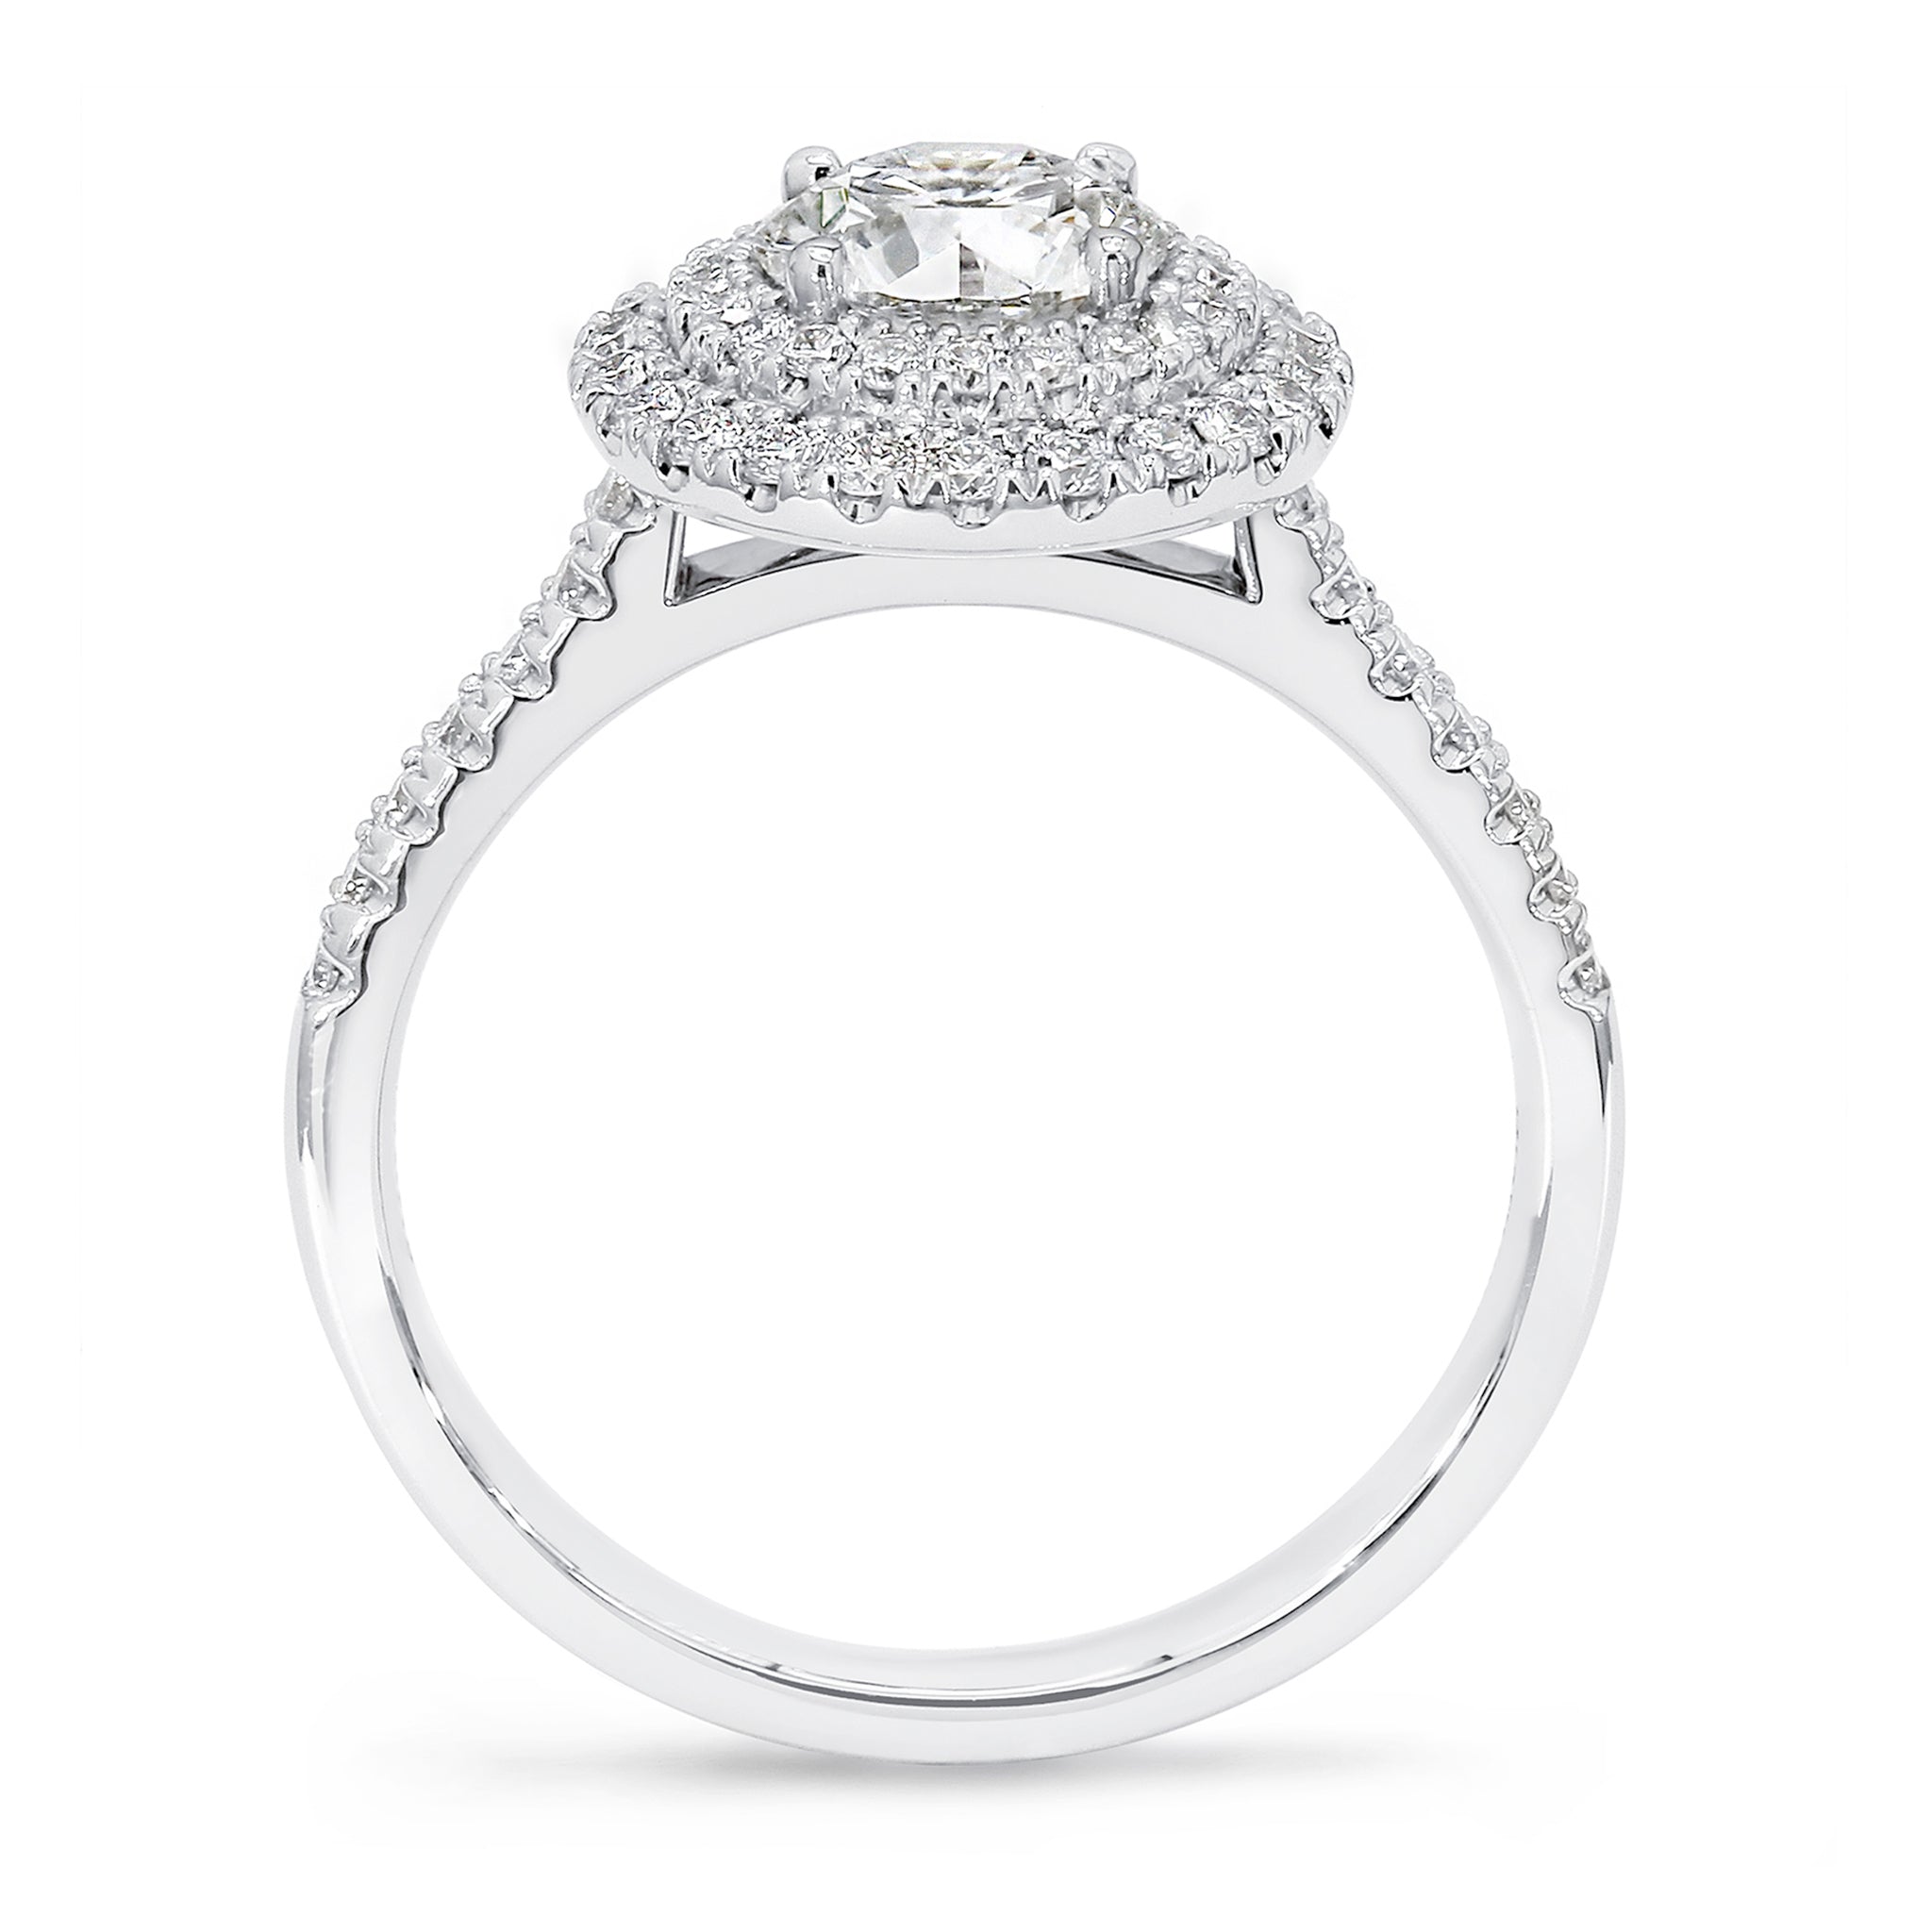 Shimansky - Diamond Double Microset Halo Ring 1.50ct crafted in Platinum